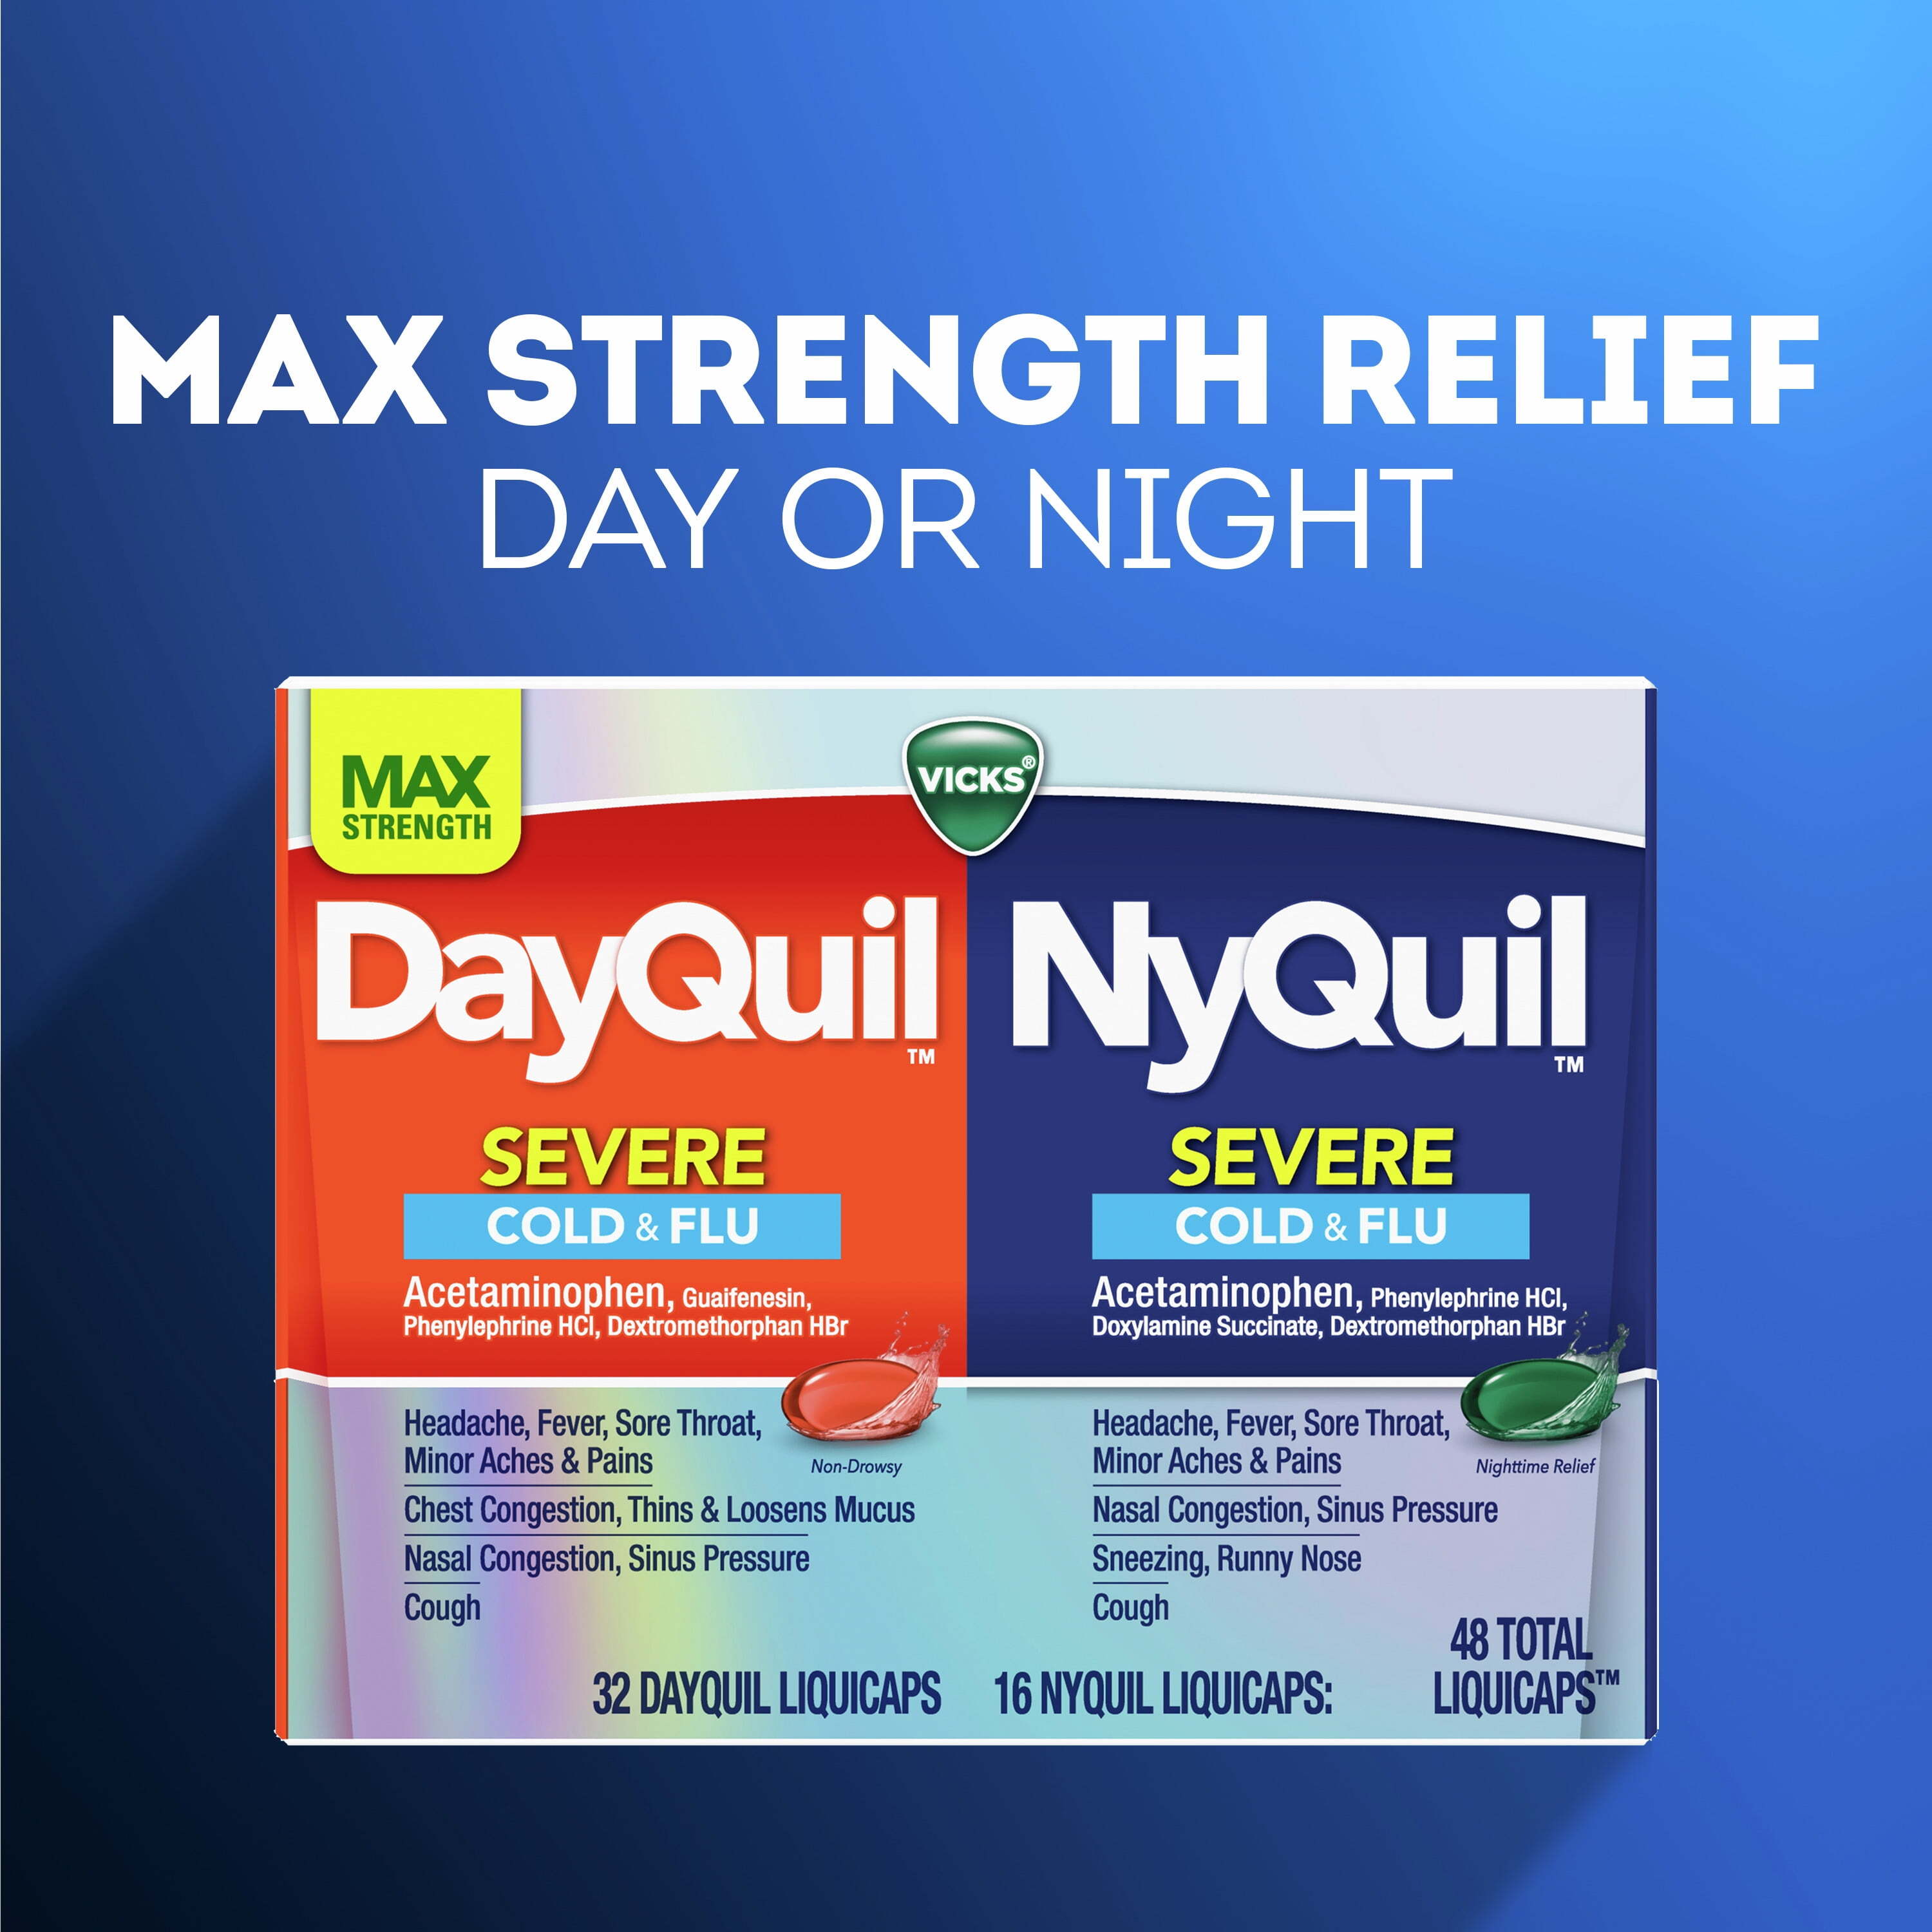 Vicks DayQuil & NyQuil Severe Liquicaps, Cough, Cold & Flu Relief, over-the-Counter Medicine, 48 Ct - image 3 of 6